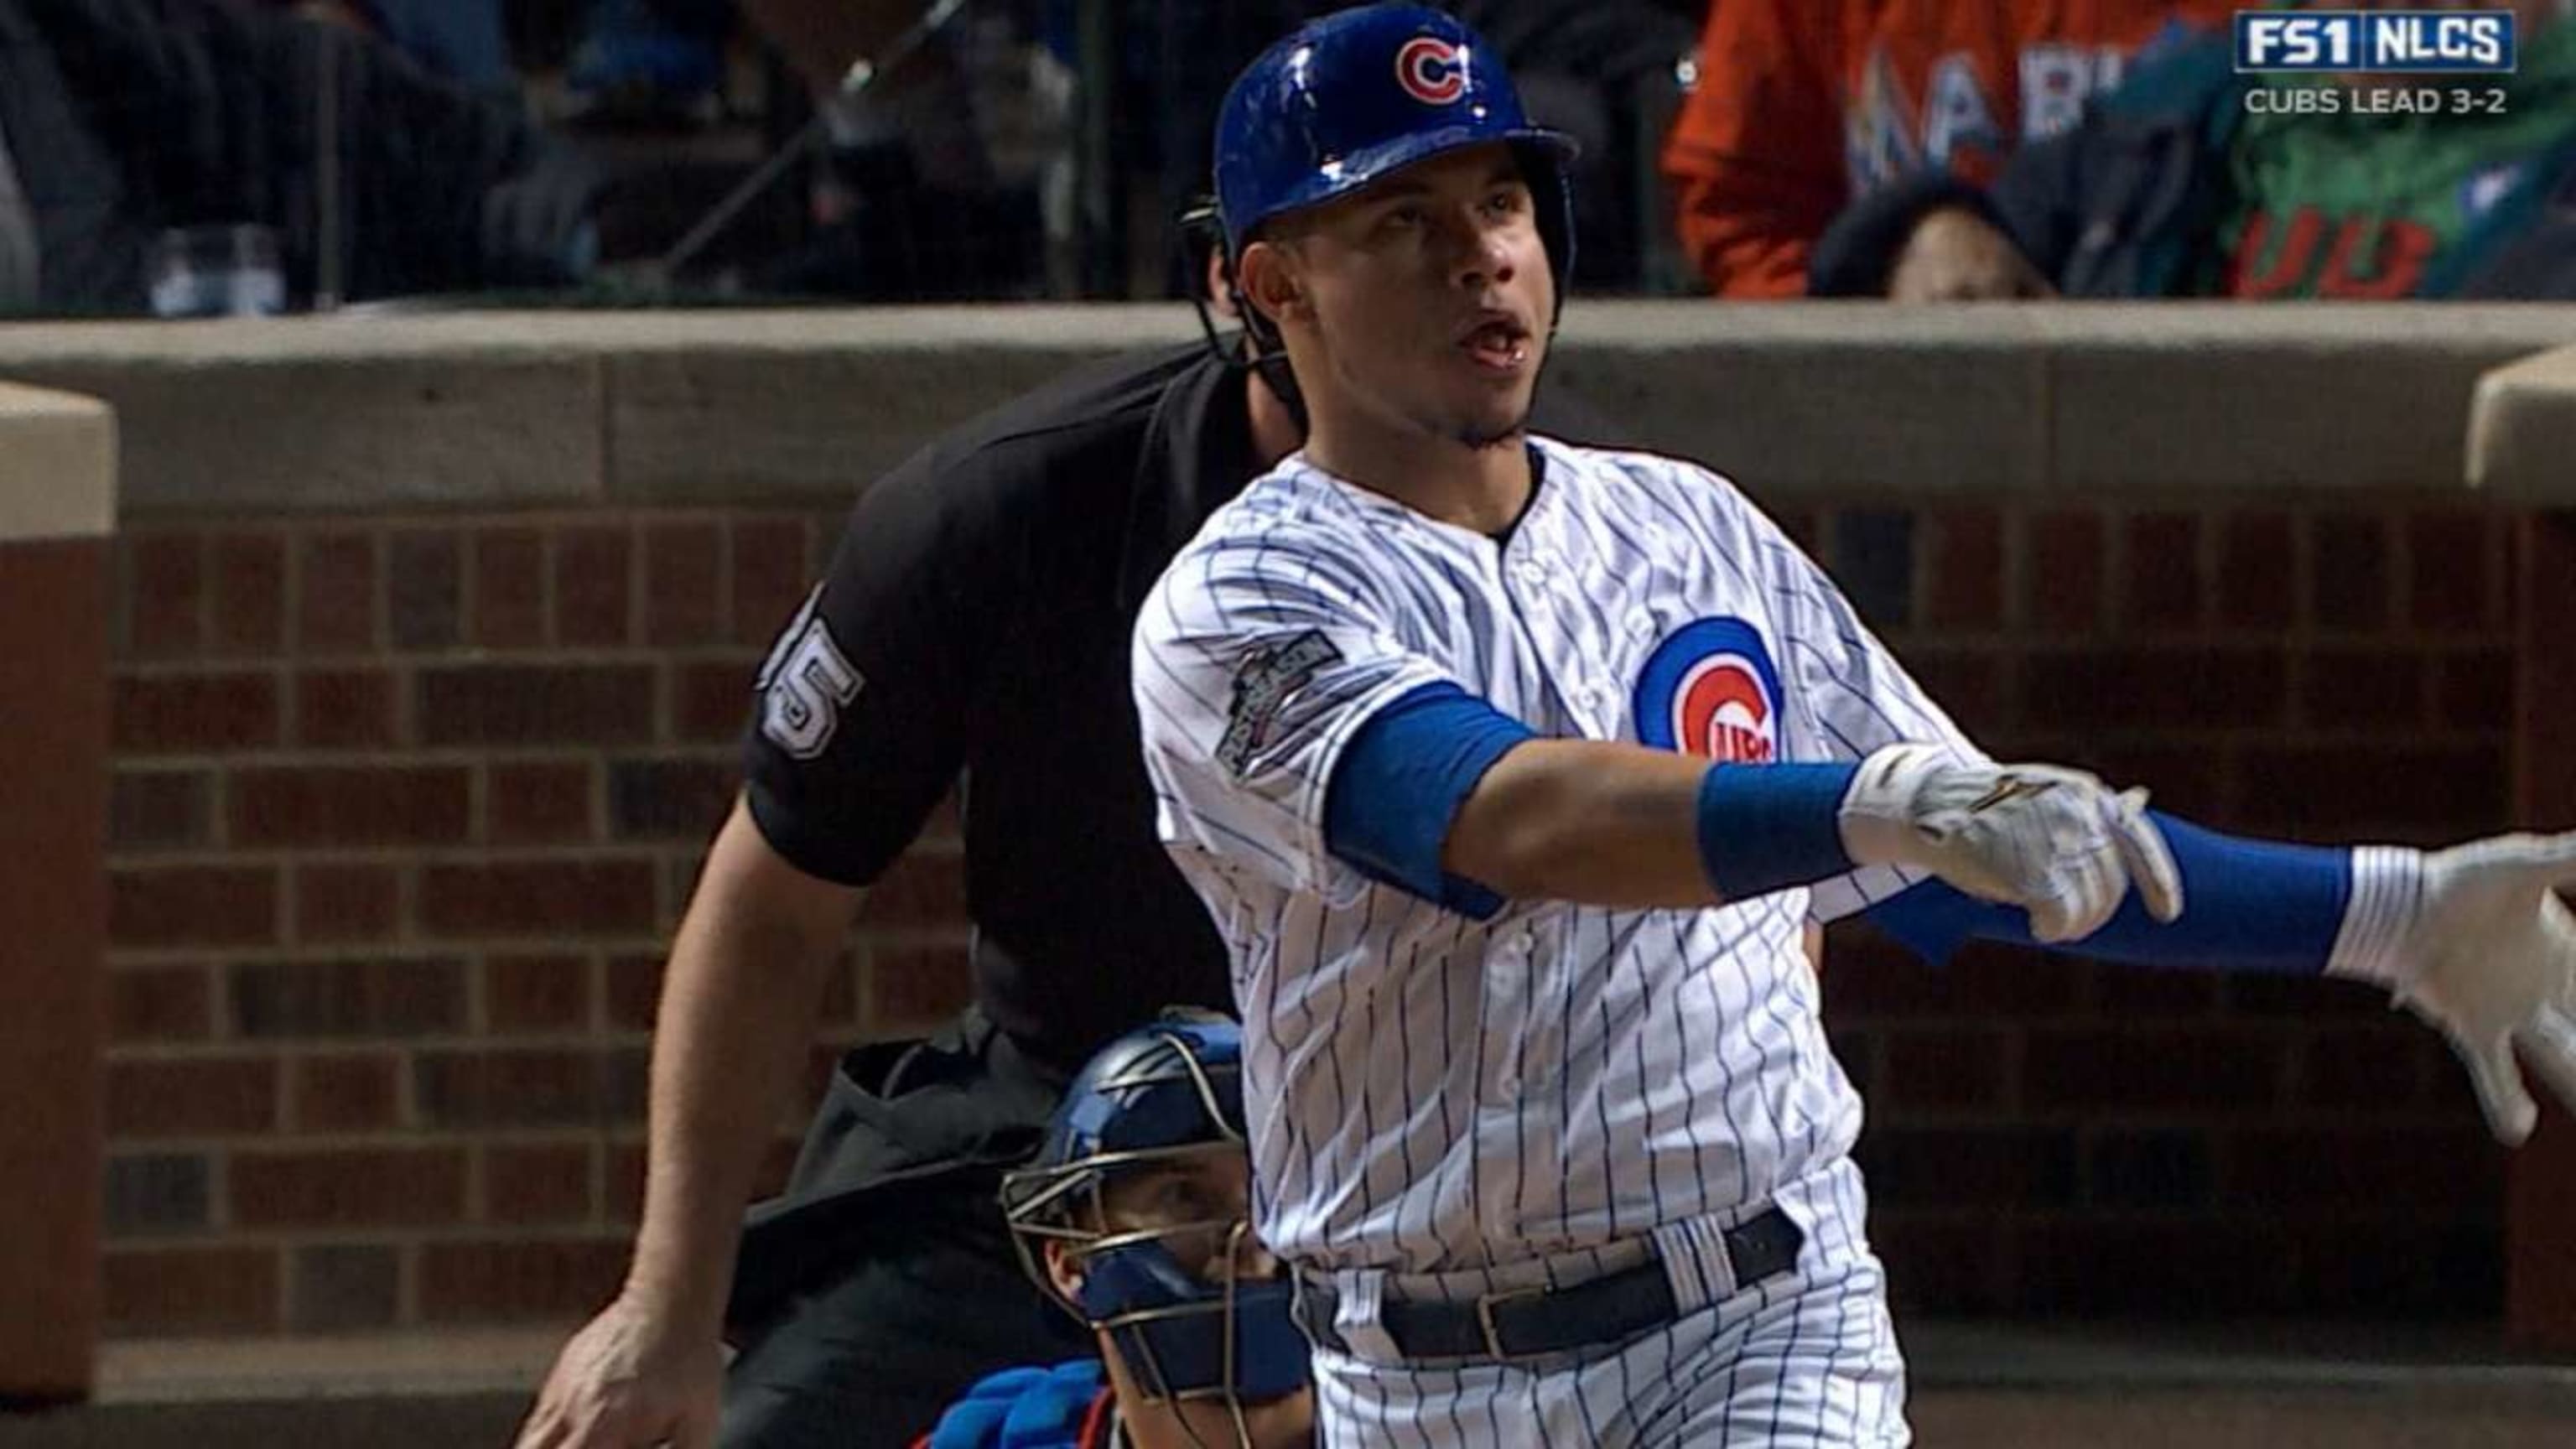 Must C: Cubs win NL pennant, 10/22/2016